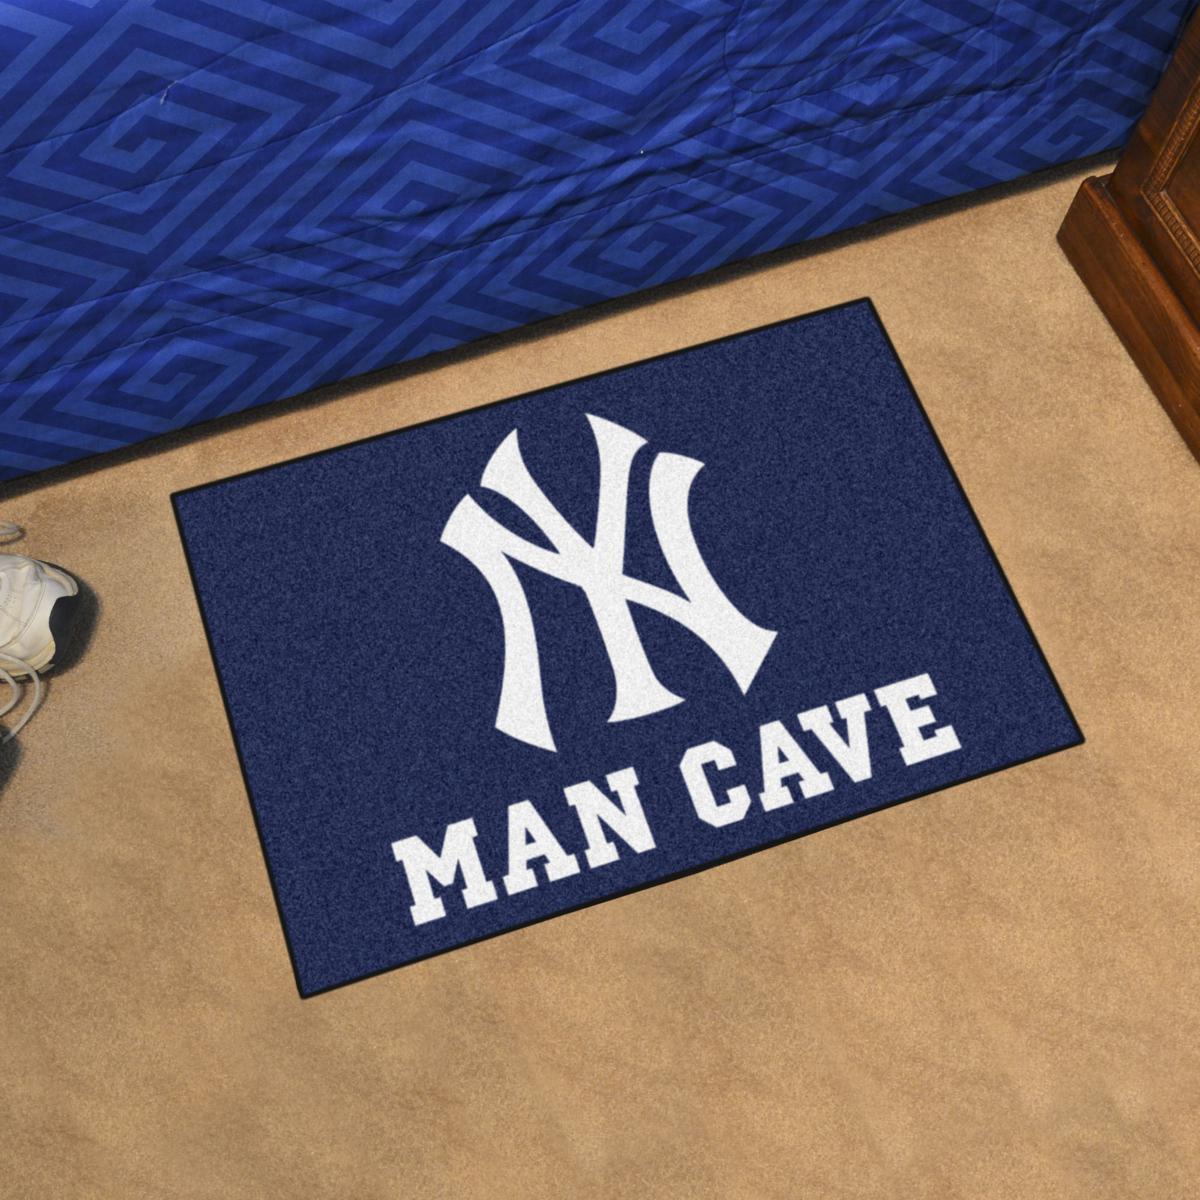 Officially Licensed MLB NY Yankees Retro Collection Rug - 19 x 30